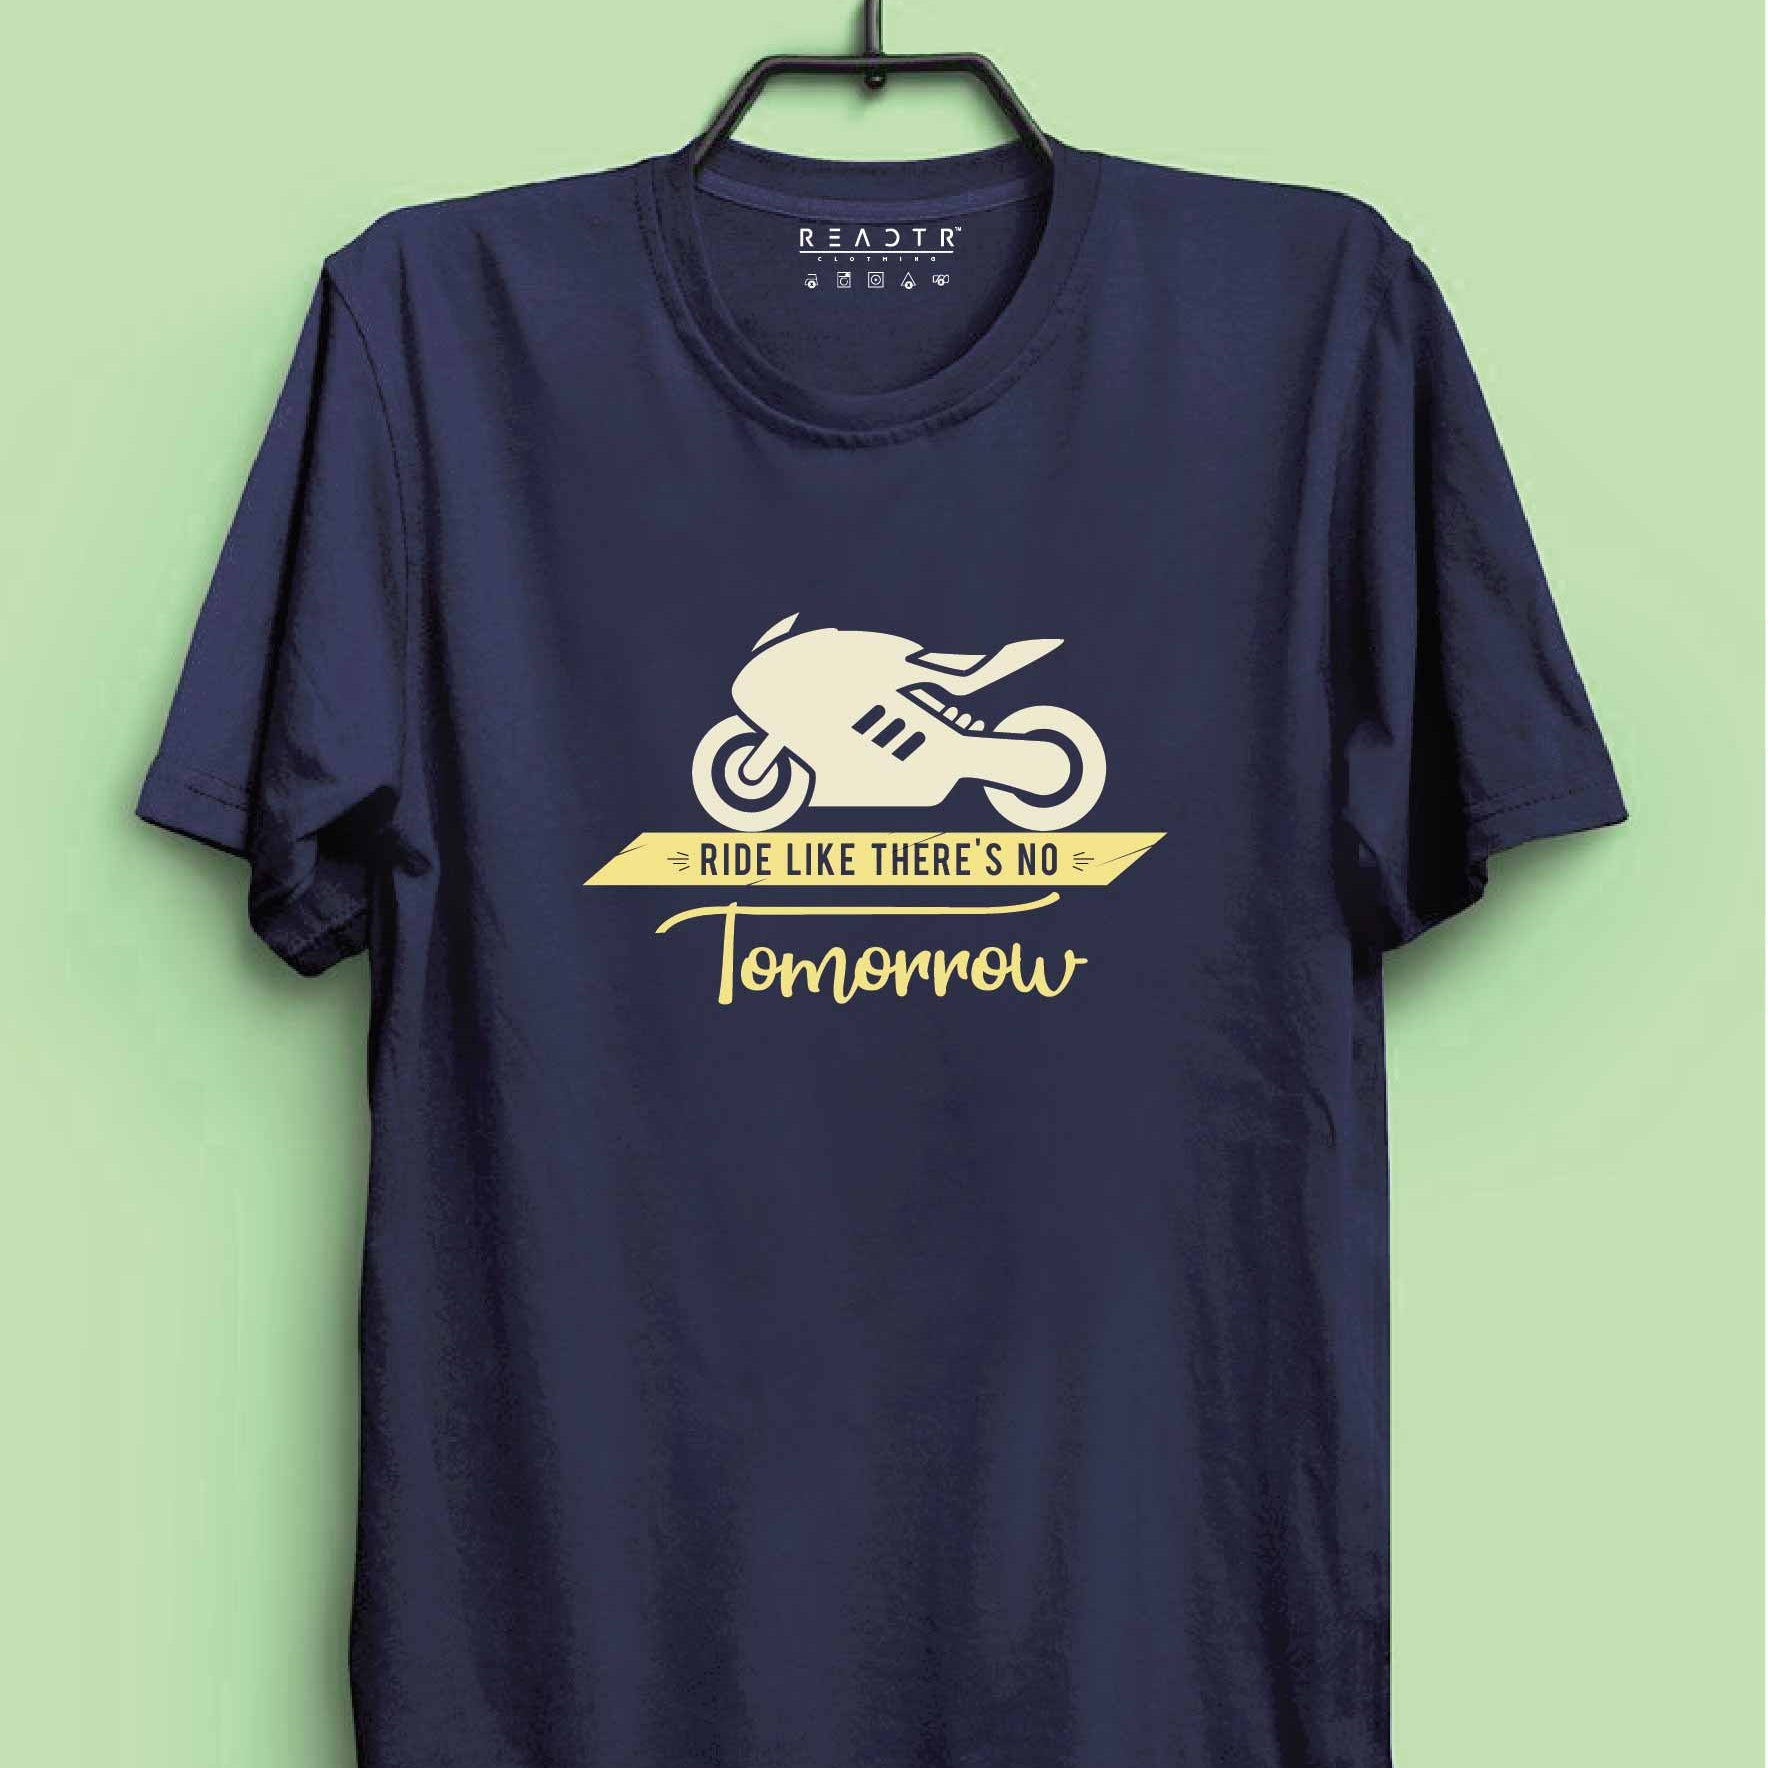 Ride Like There Is No Tomorrow Reactr Tshirts For Men - Eyewearlabs